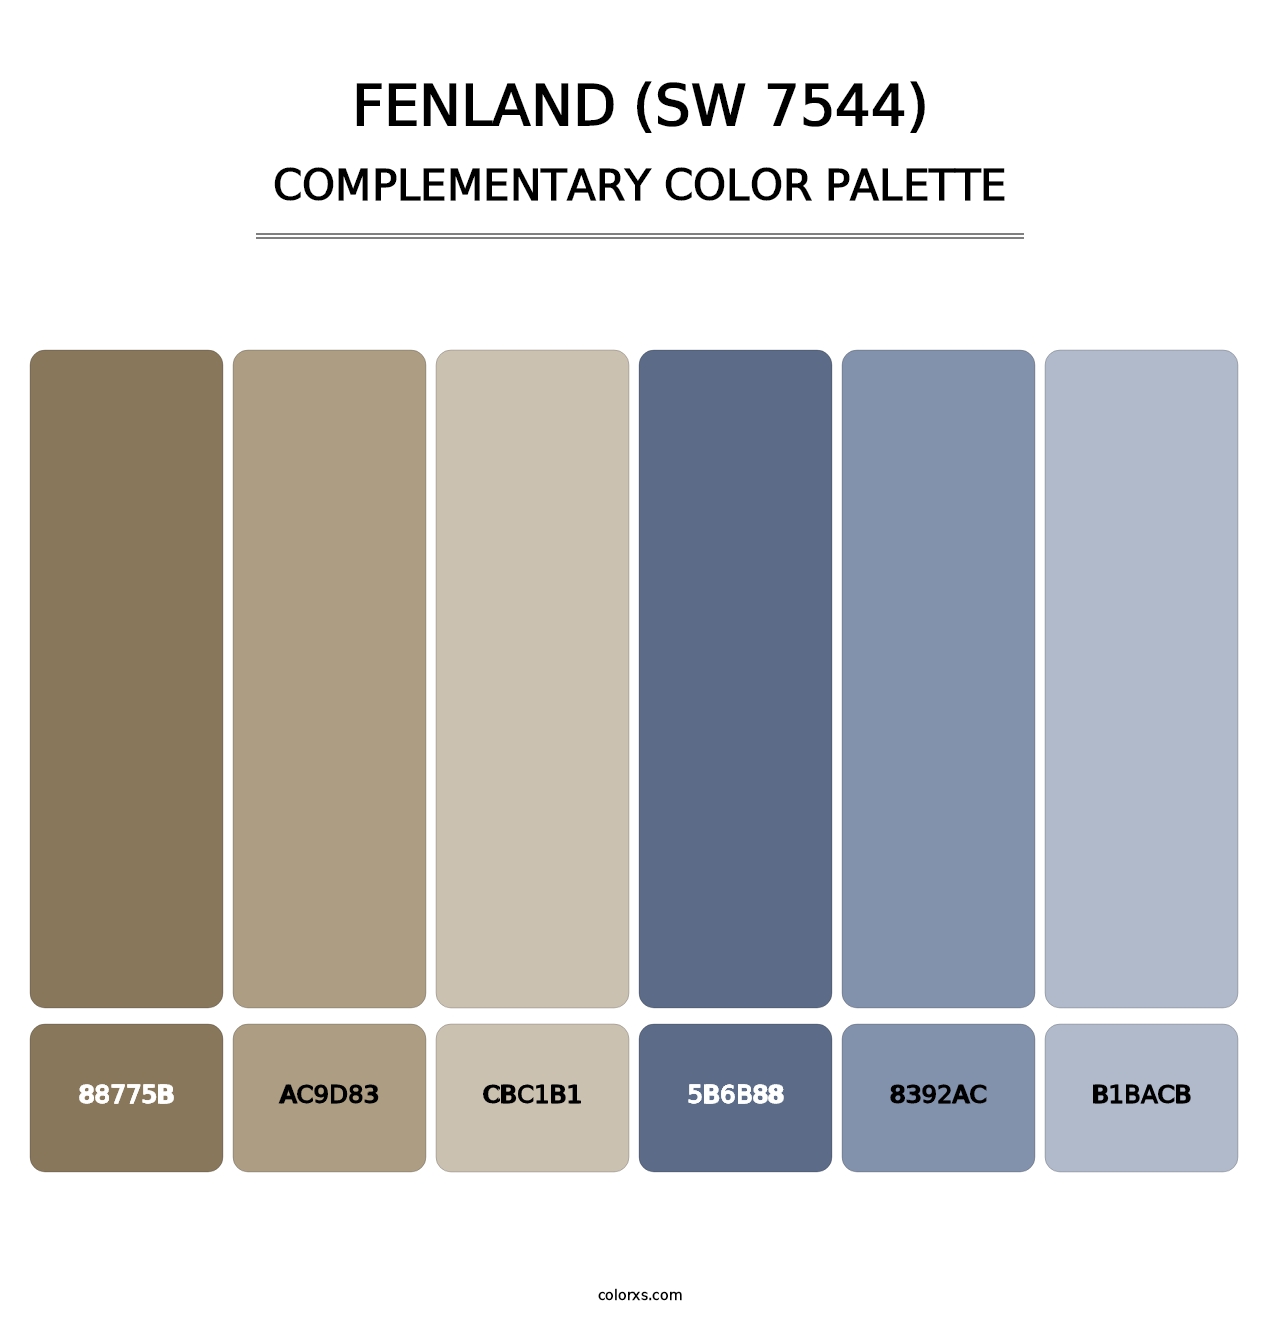 Fenland (SW 7544) - Complementary Color Palette